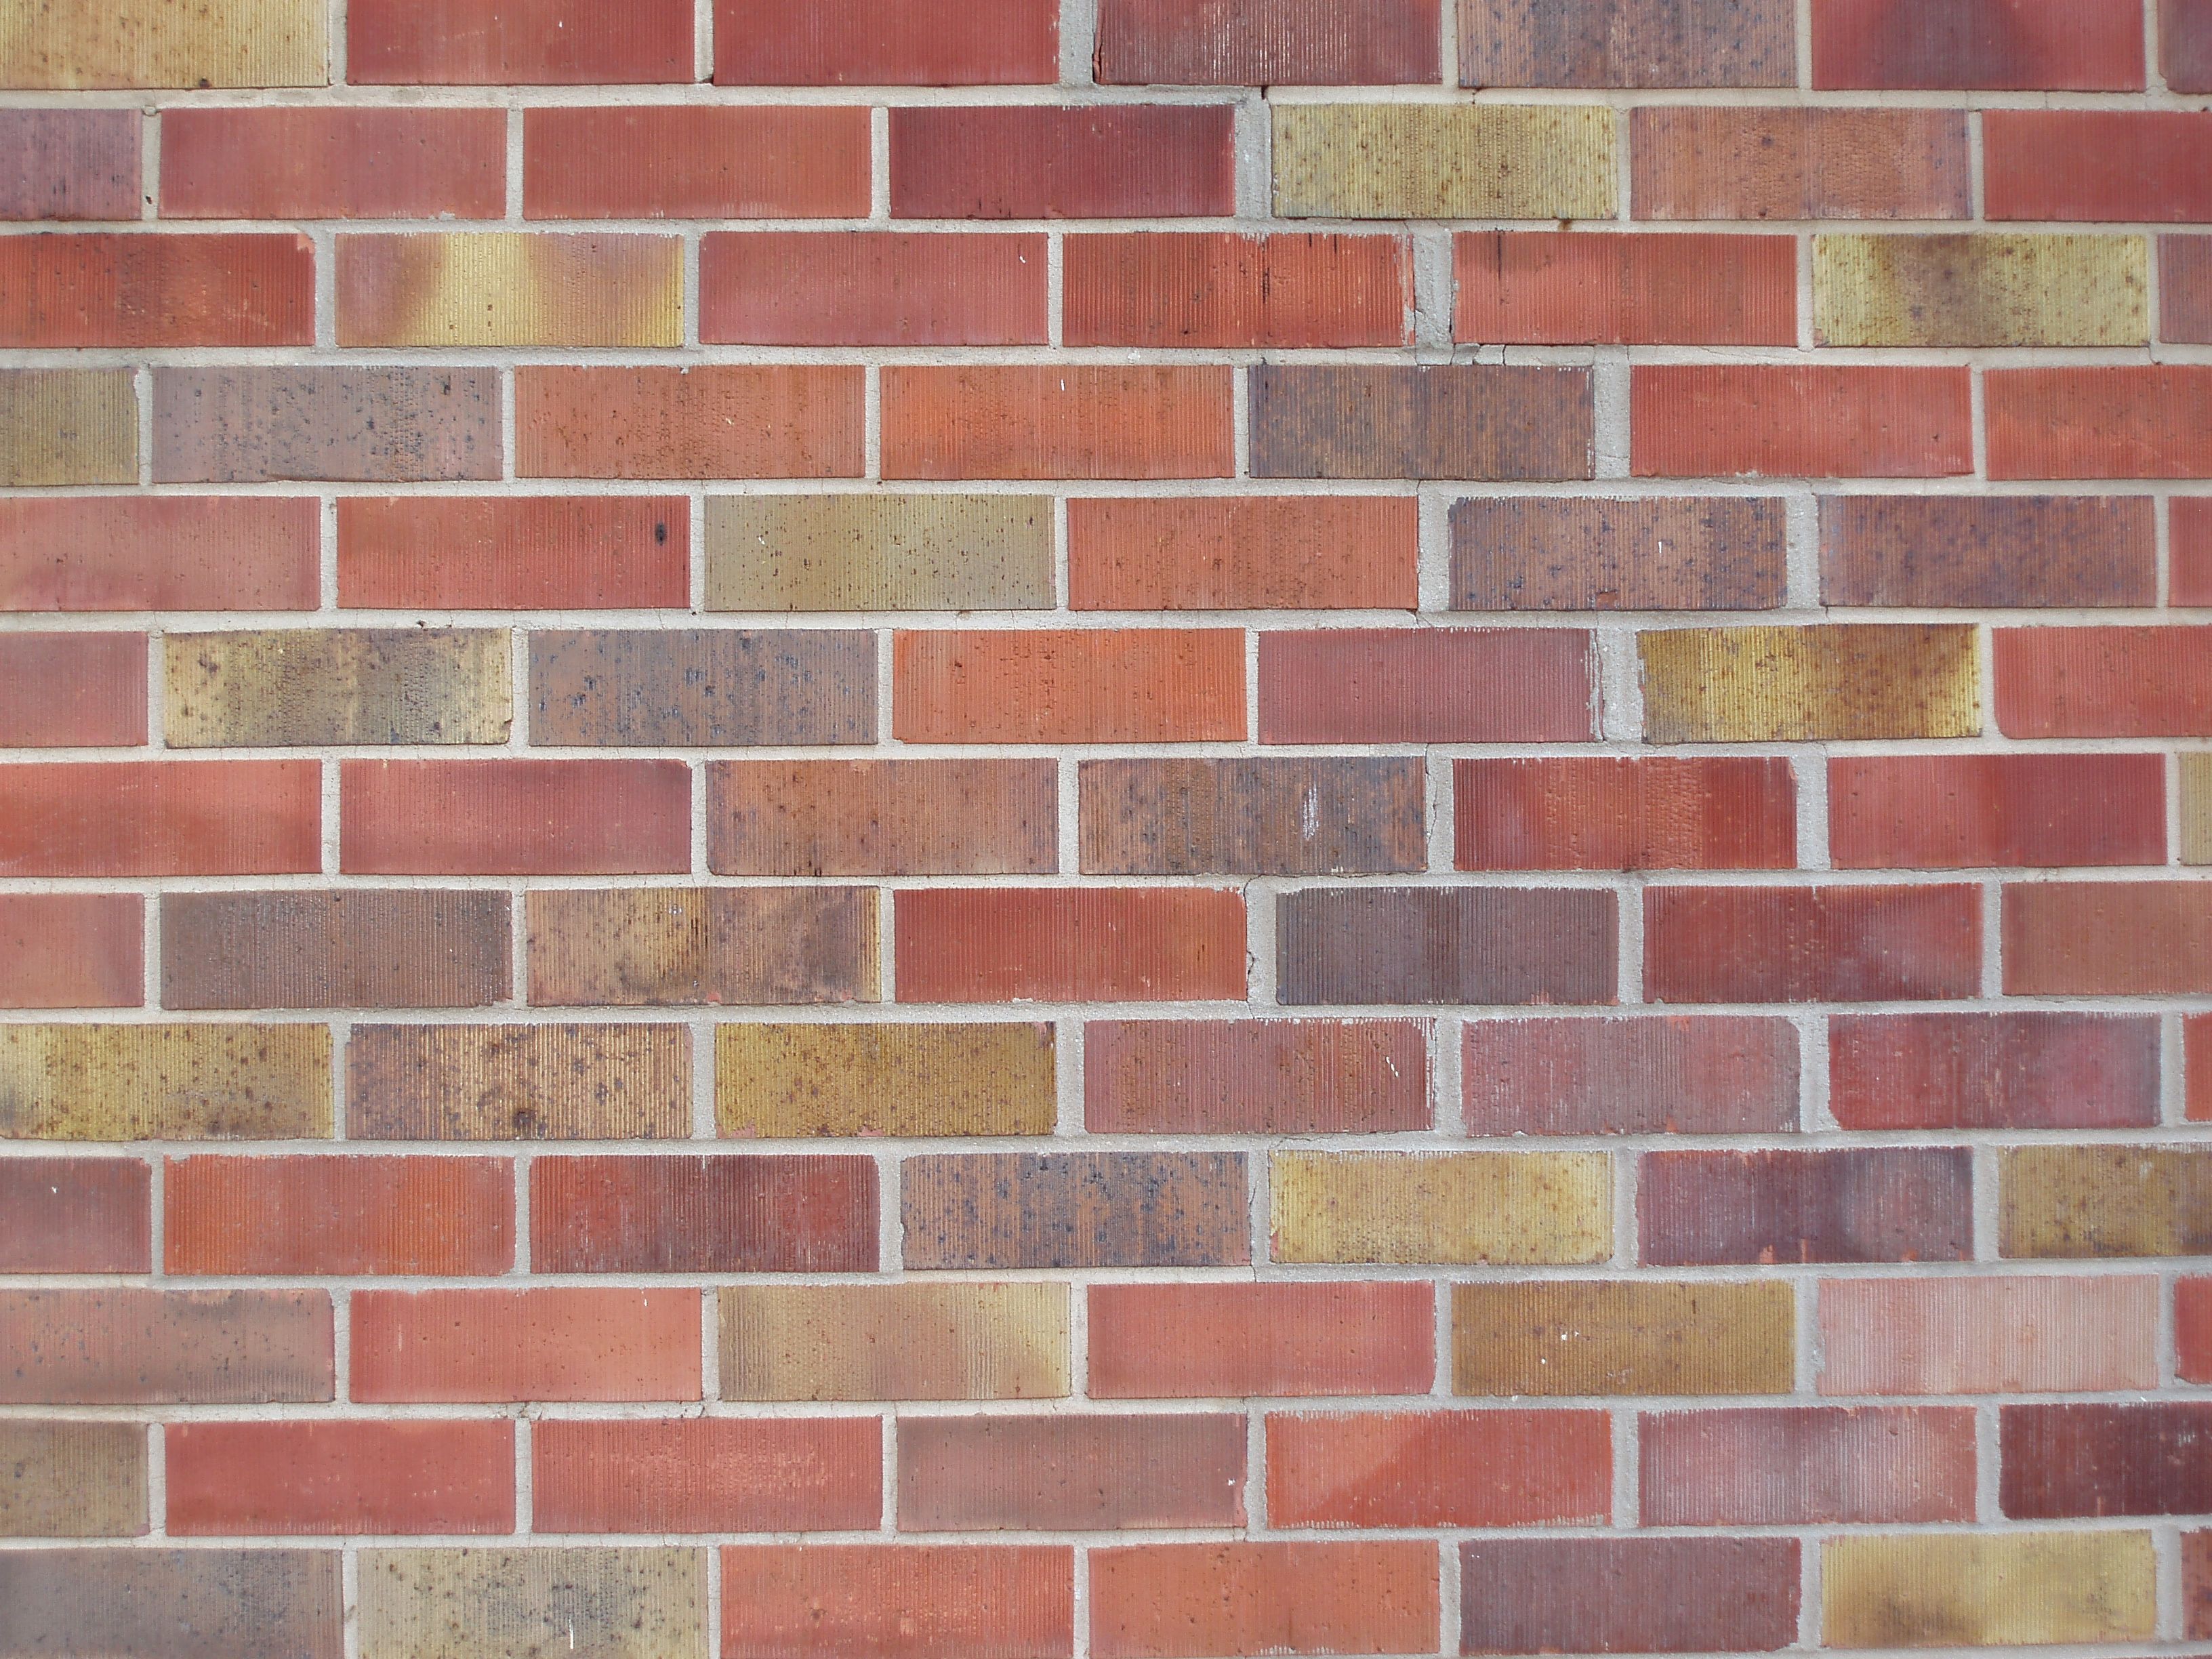 horizontal brick wall. Free background and textures